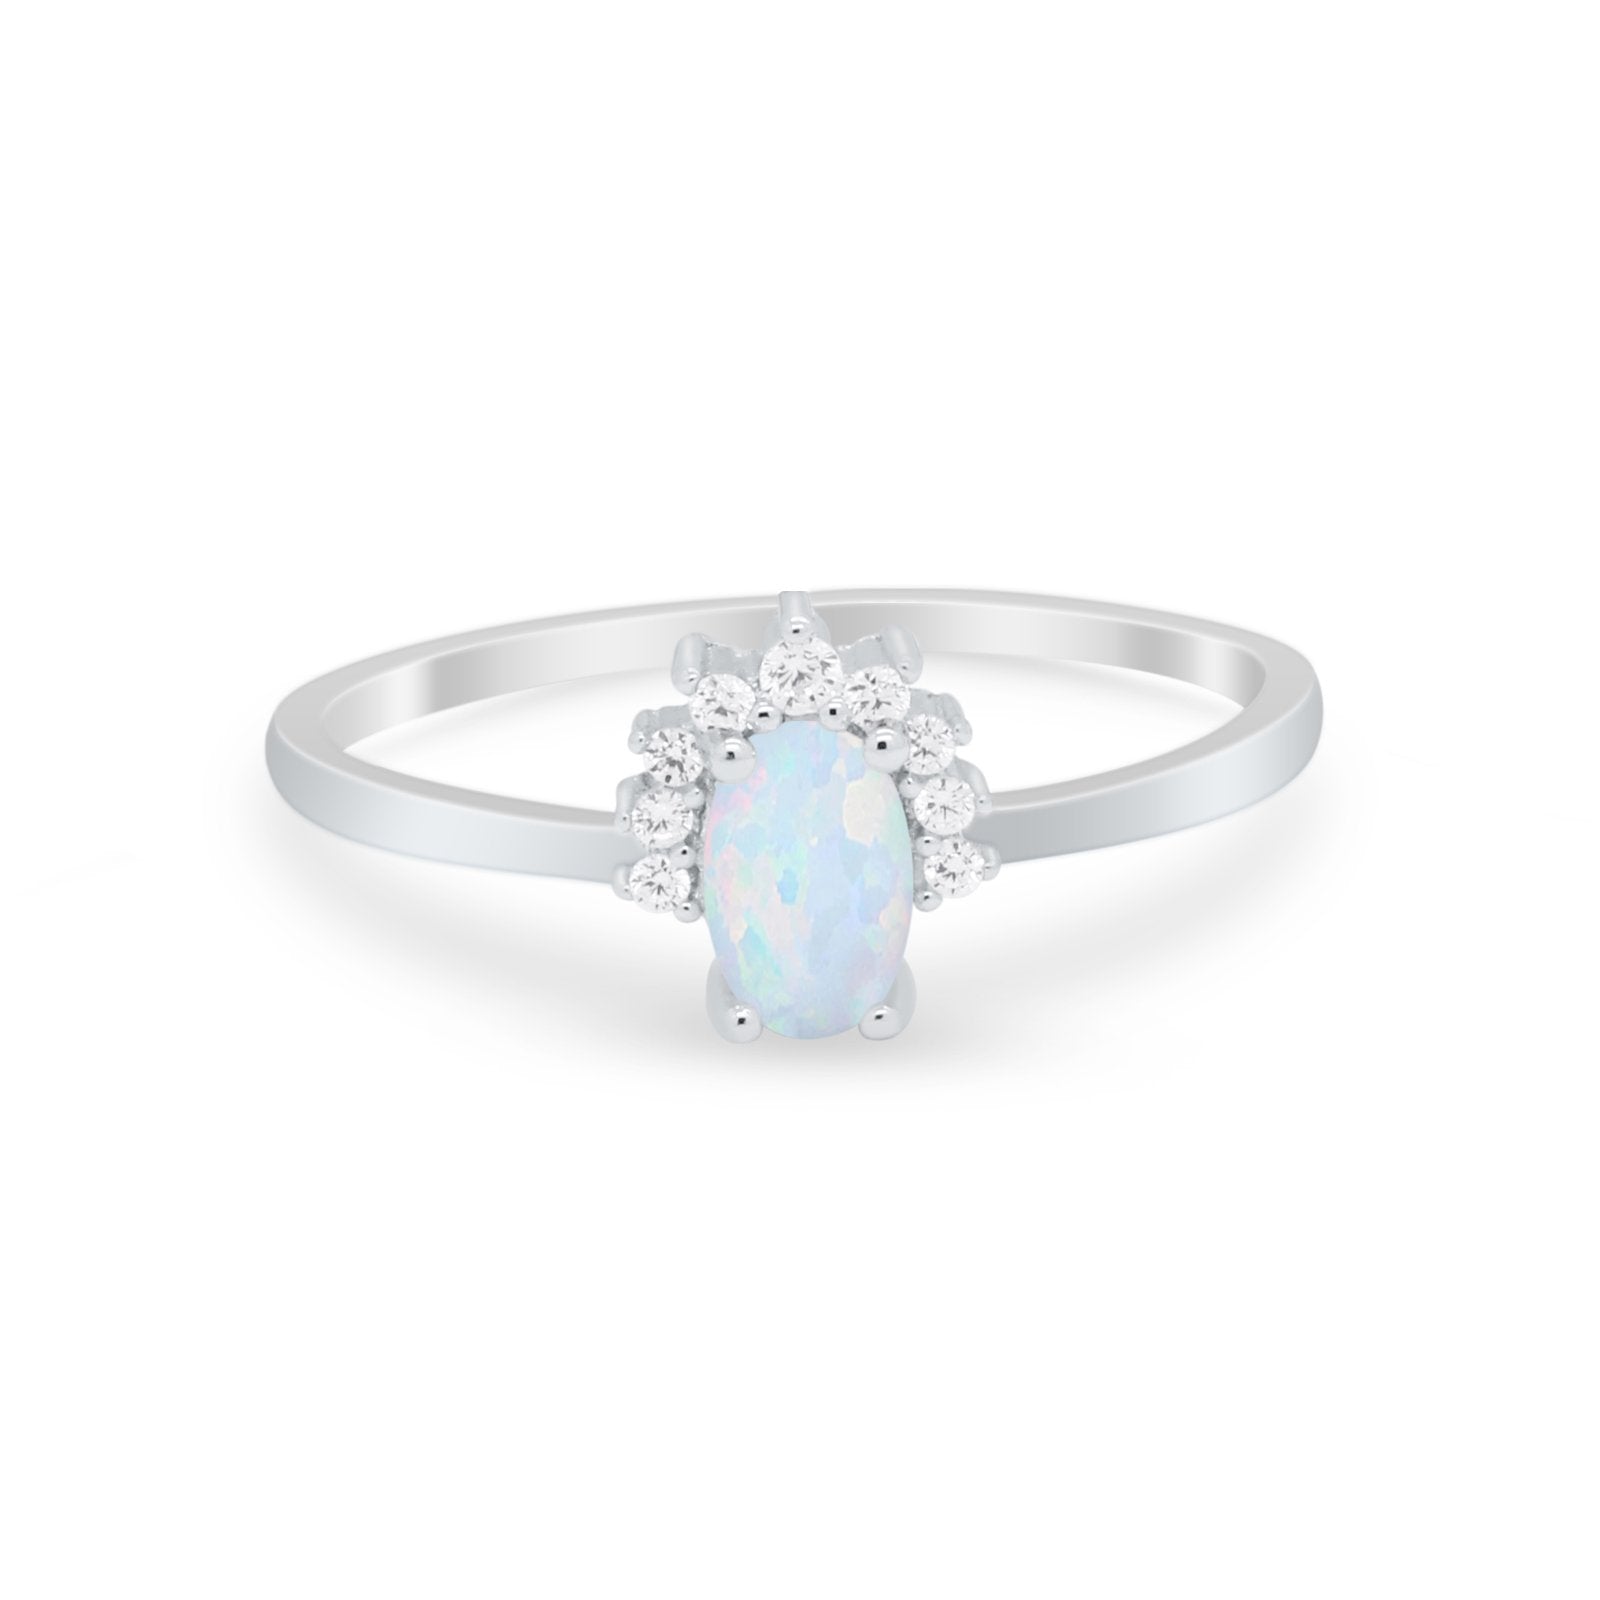 Petite Dainty Fashion Thumb Ring Round Lab Created White Opal 925 Sterling Silver